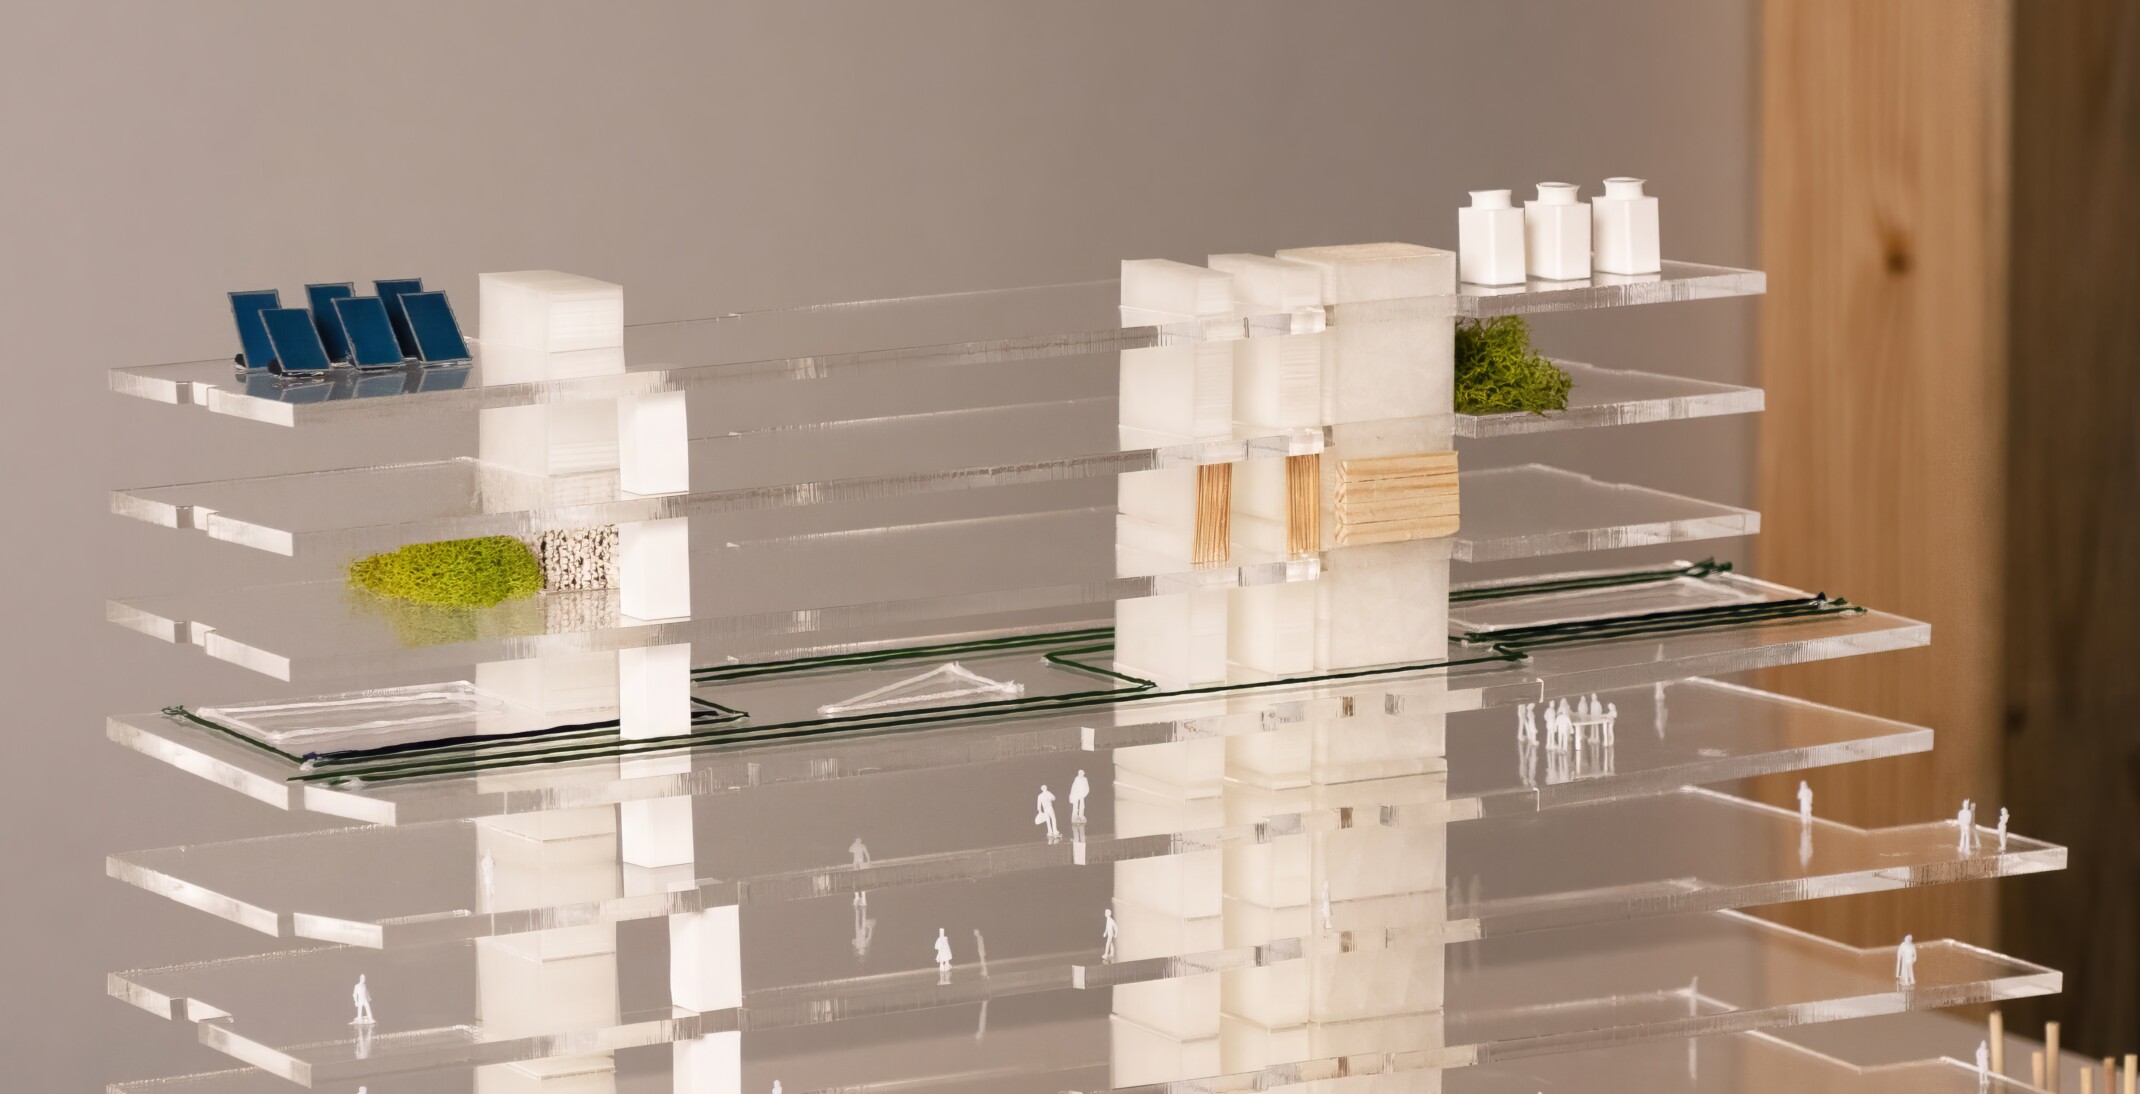 architectural model with clear acrylic floorplates, solar panels, greenery and wood details, and 3D printed cores